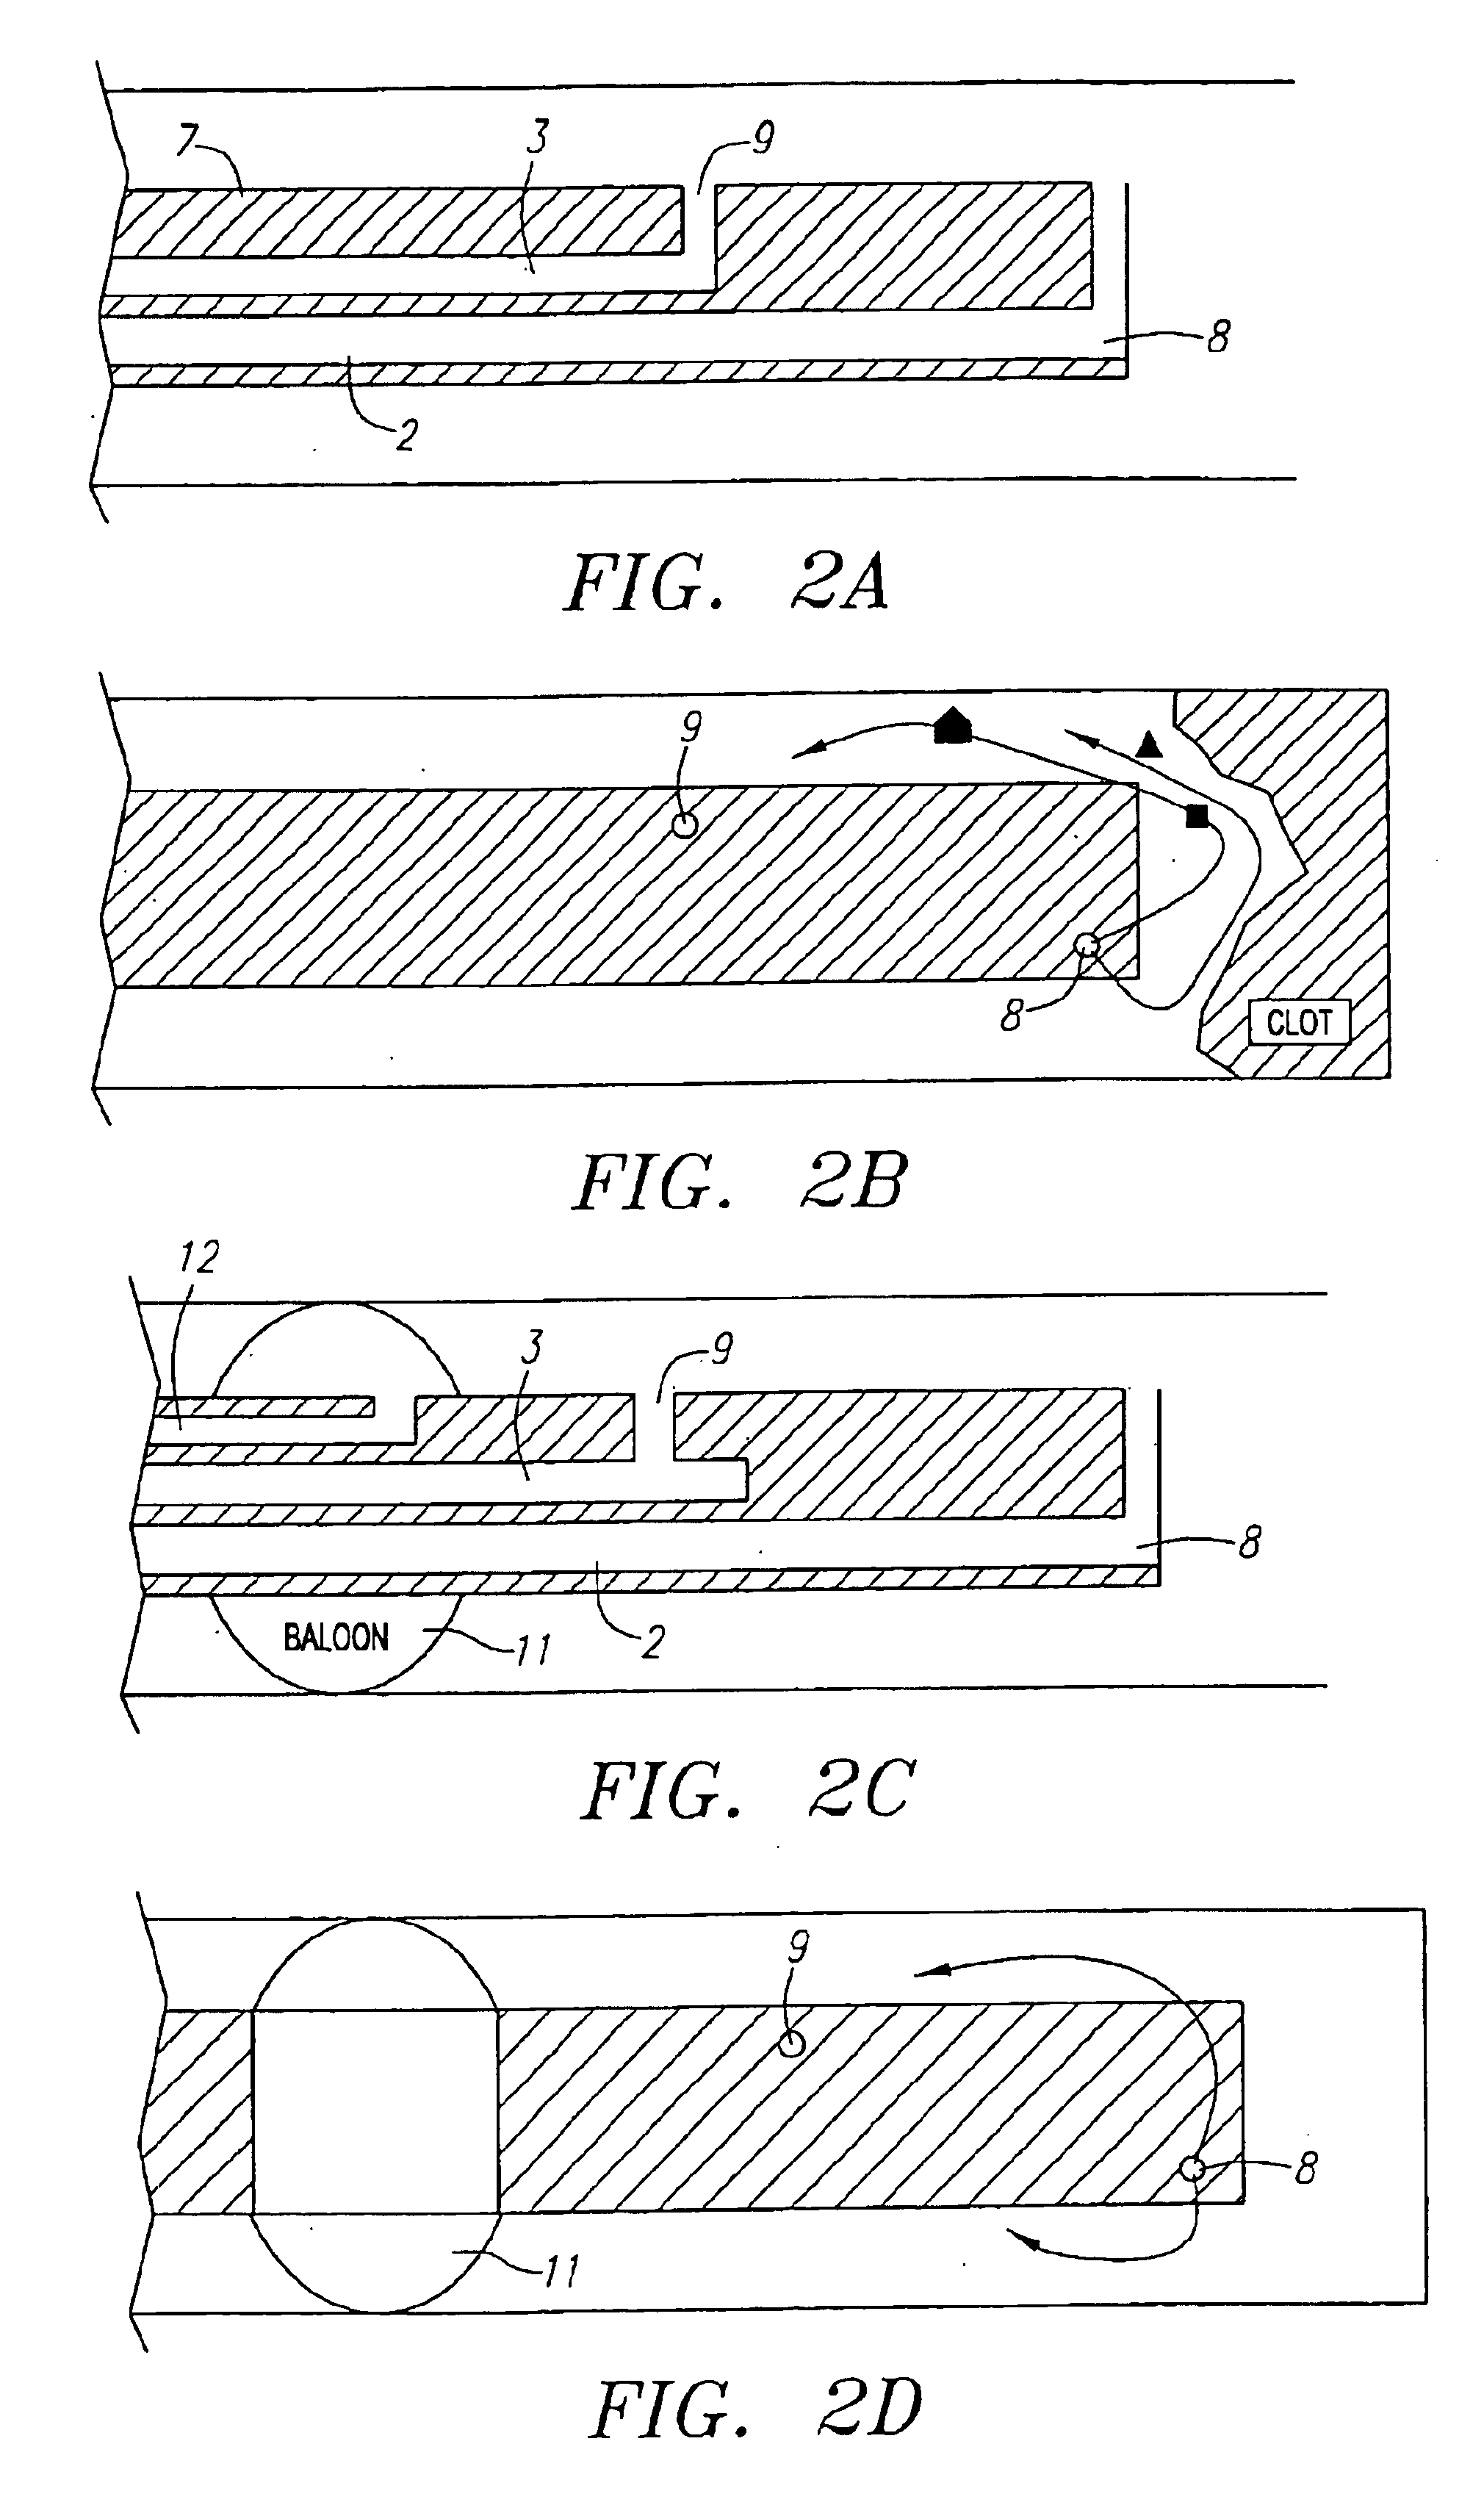 Fluid exchange system for controlled and localized irrigation and aspiration